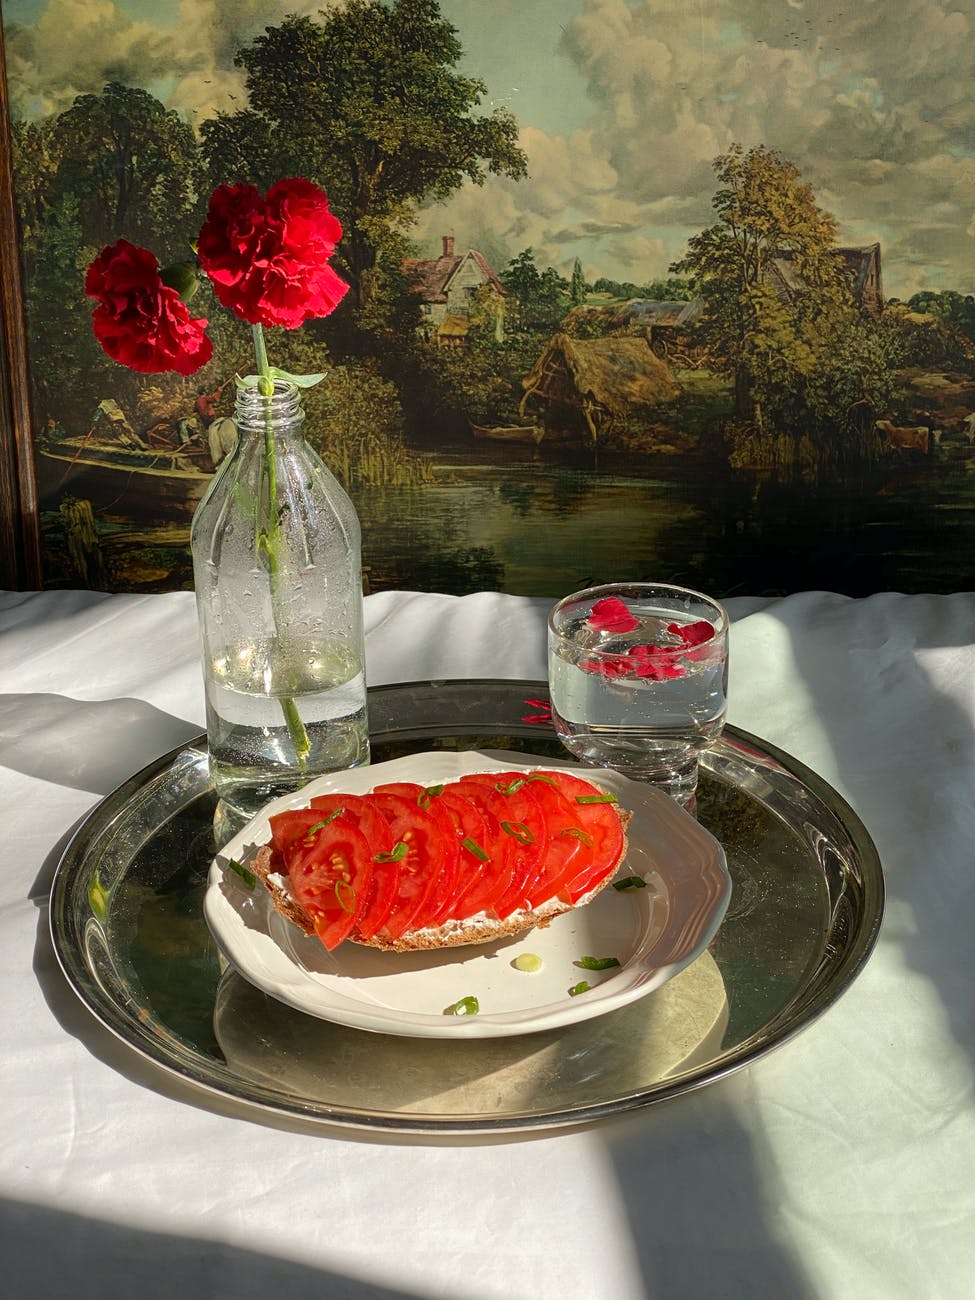 tray with sandwich with tomatoes near glass and flower